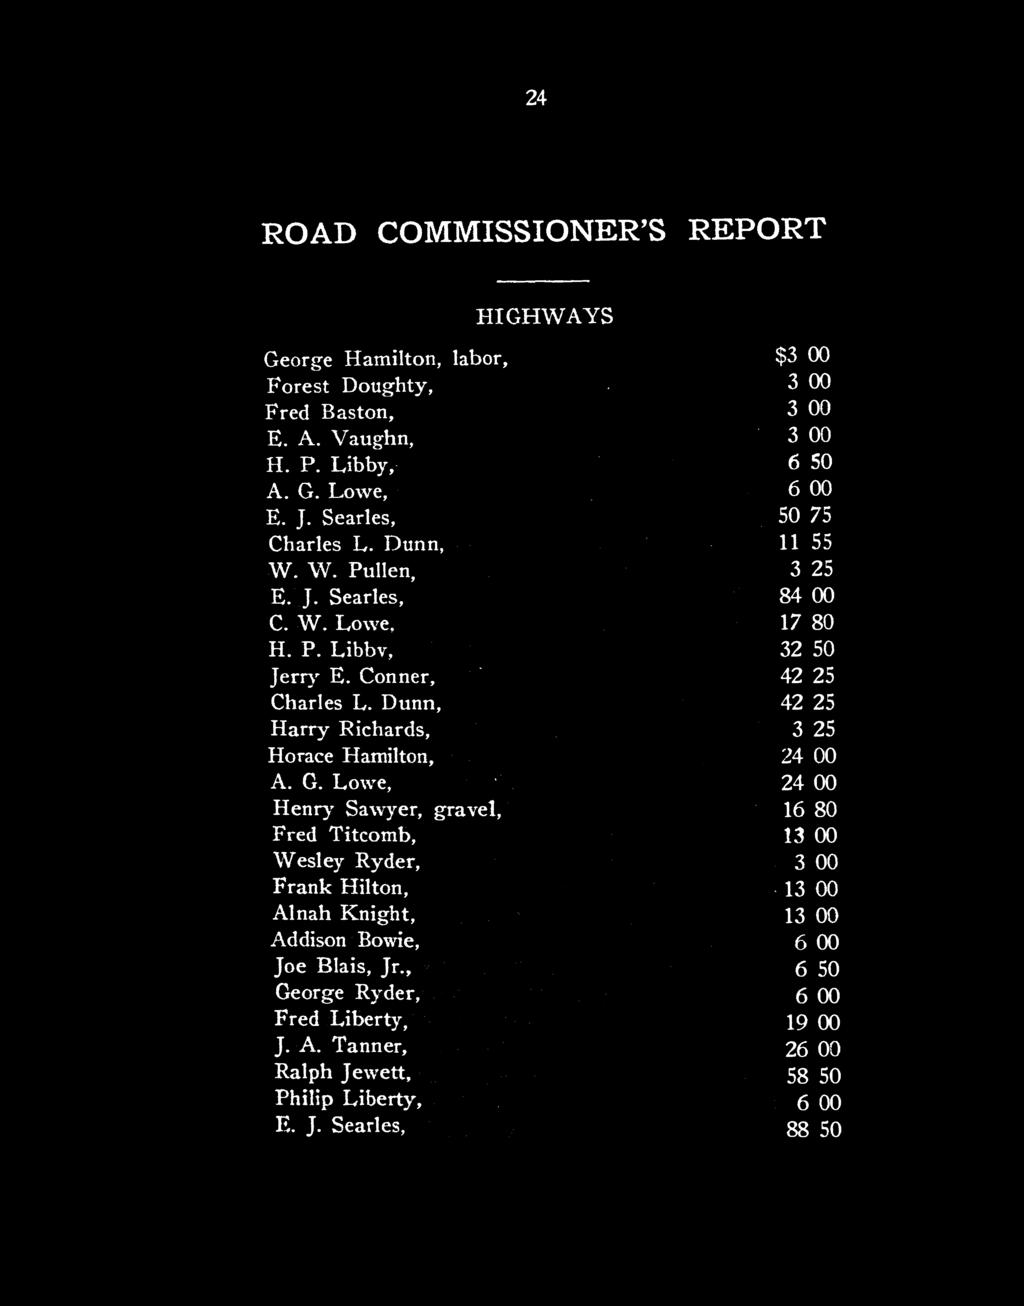 24 ROAD COMMISSIONER'S REPORT HIGHWAYS George Hamilton, labor, $3 00 Forest Doughty, 3 00 Fred Baston, 3 00 E. A. Vaughn, 3 00 H. P. Libby, 6 50 A. G. Lowe, 6 00 E. J. Searles, 50 75 Charles L.